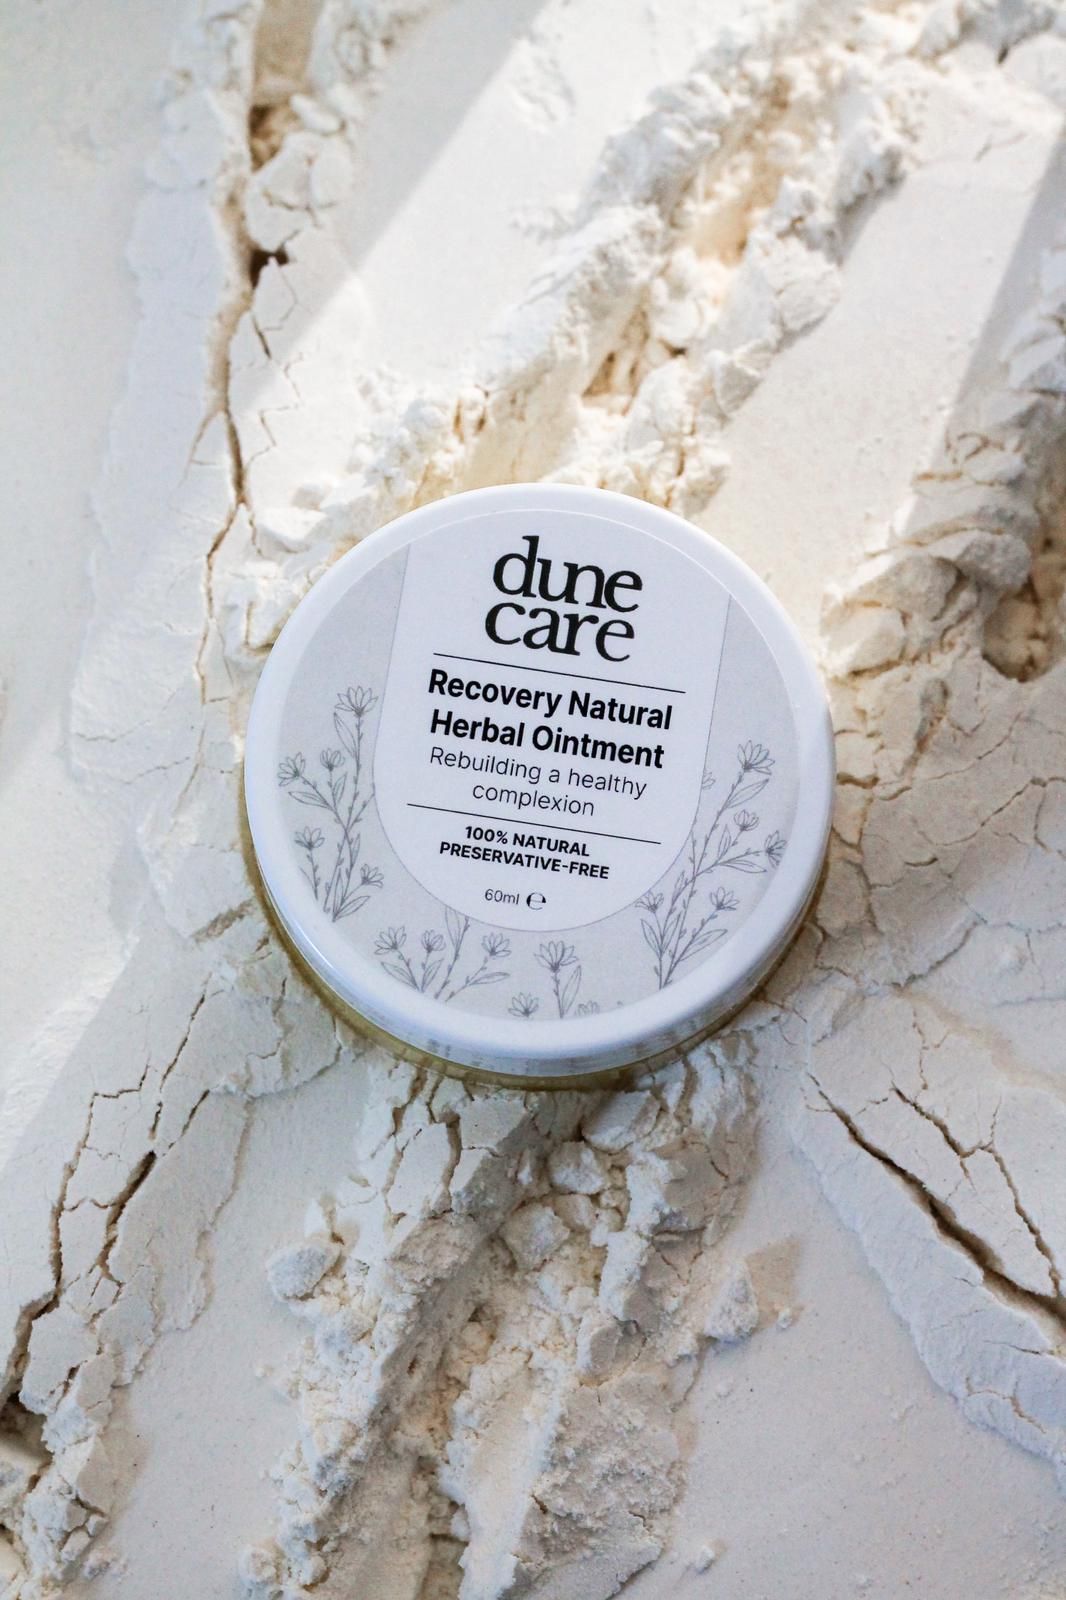 Dune Care Recovery Herbal Ointment